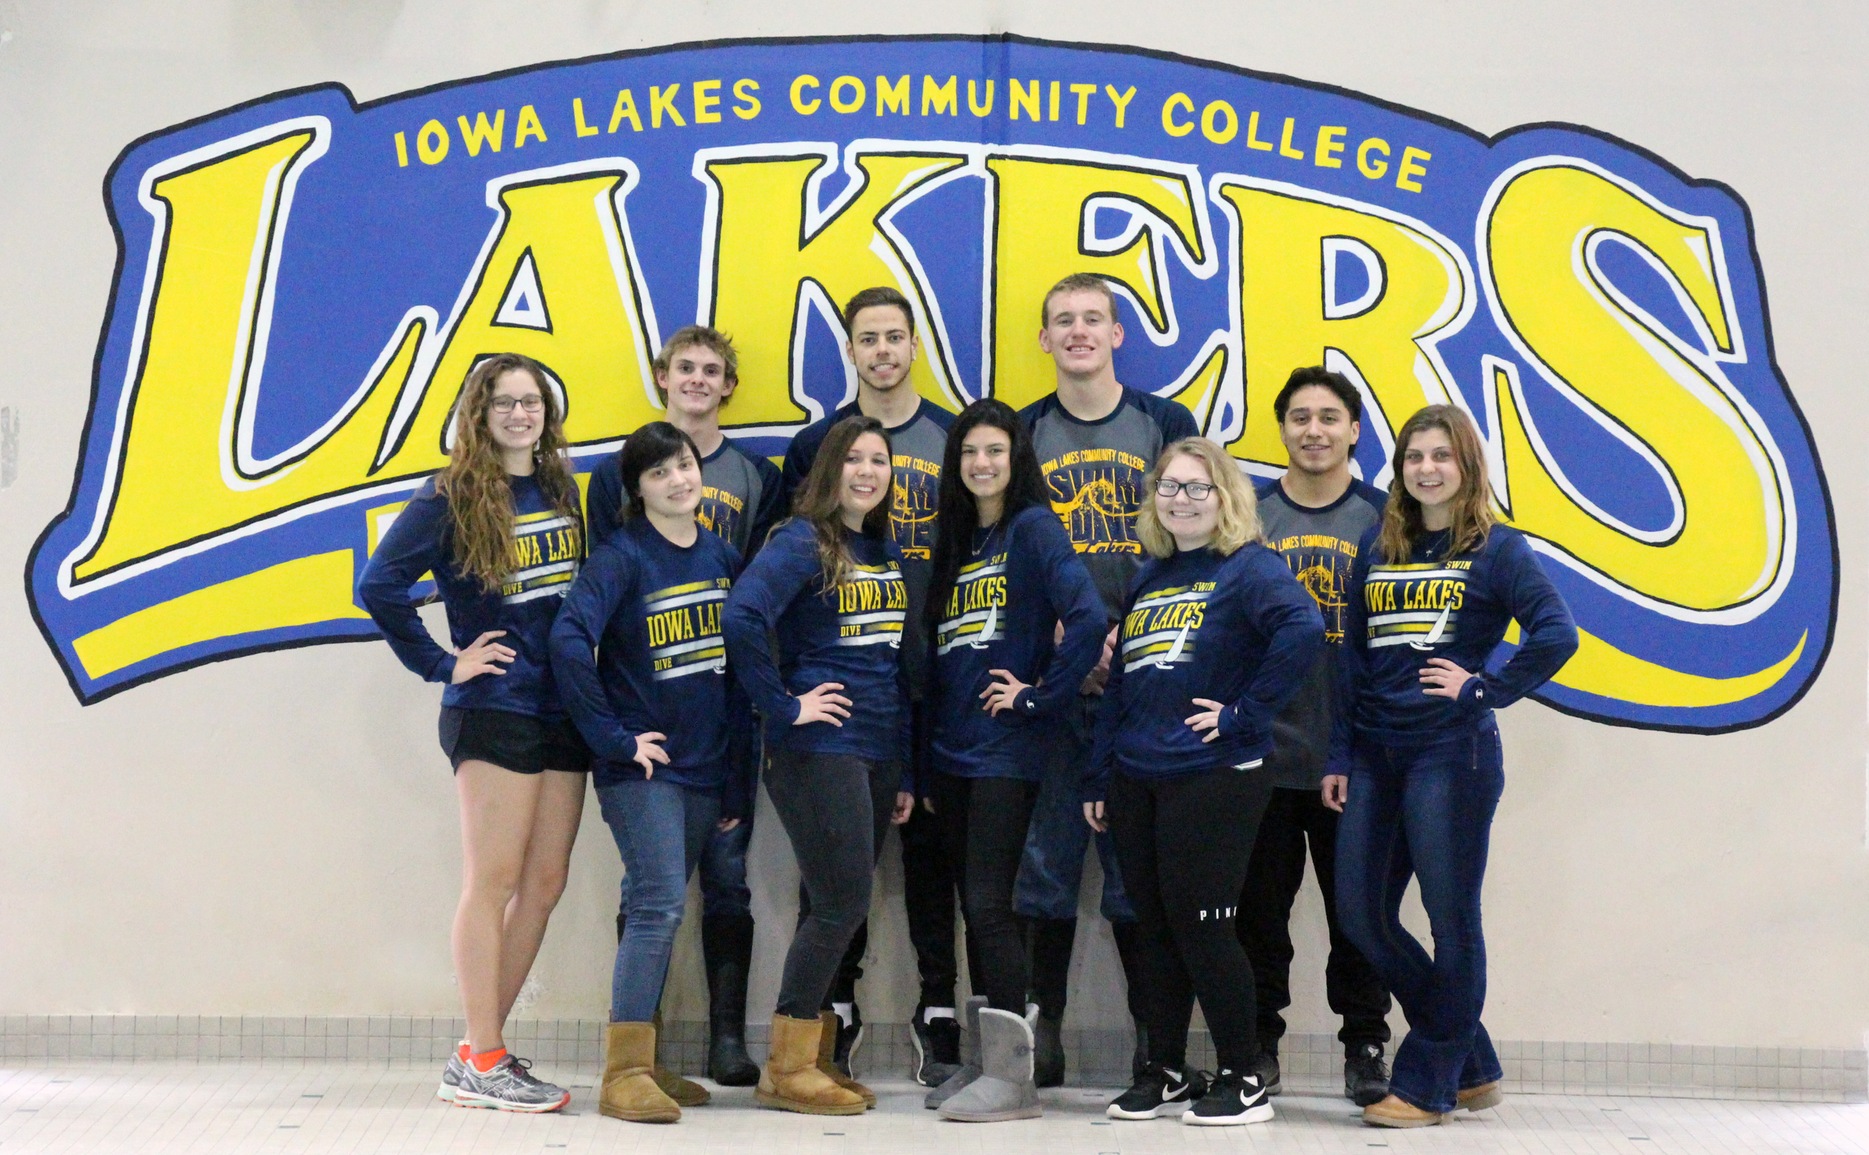 Laker Swimmers Have Strong Performances at Midwest Cup Regional Meet